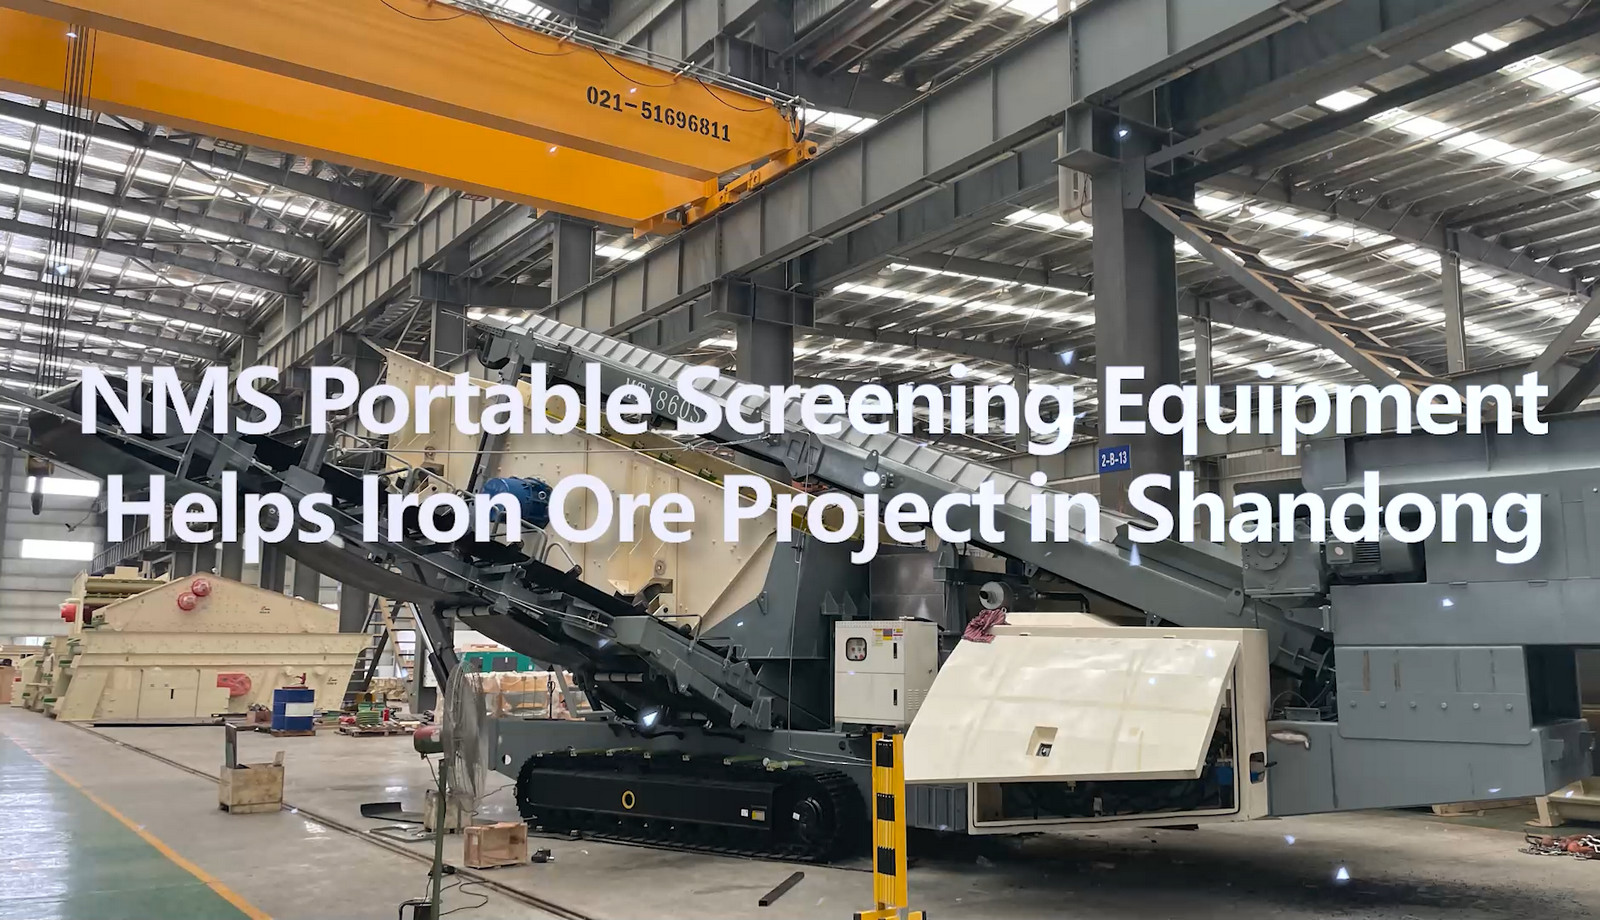 NMS Portable Screening Equipment Helps Iron Ore Project in Shandong